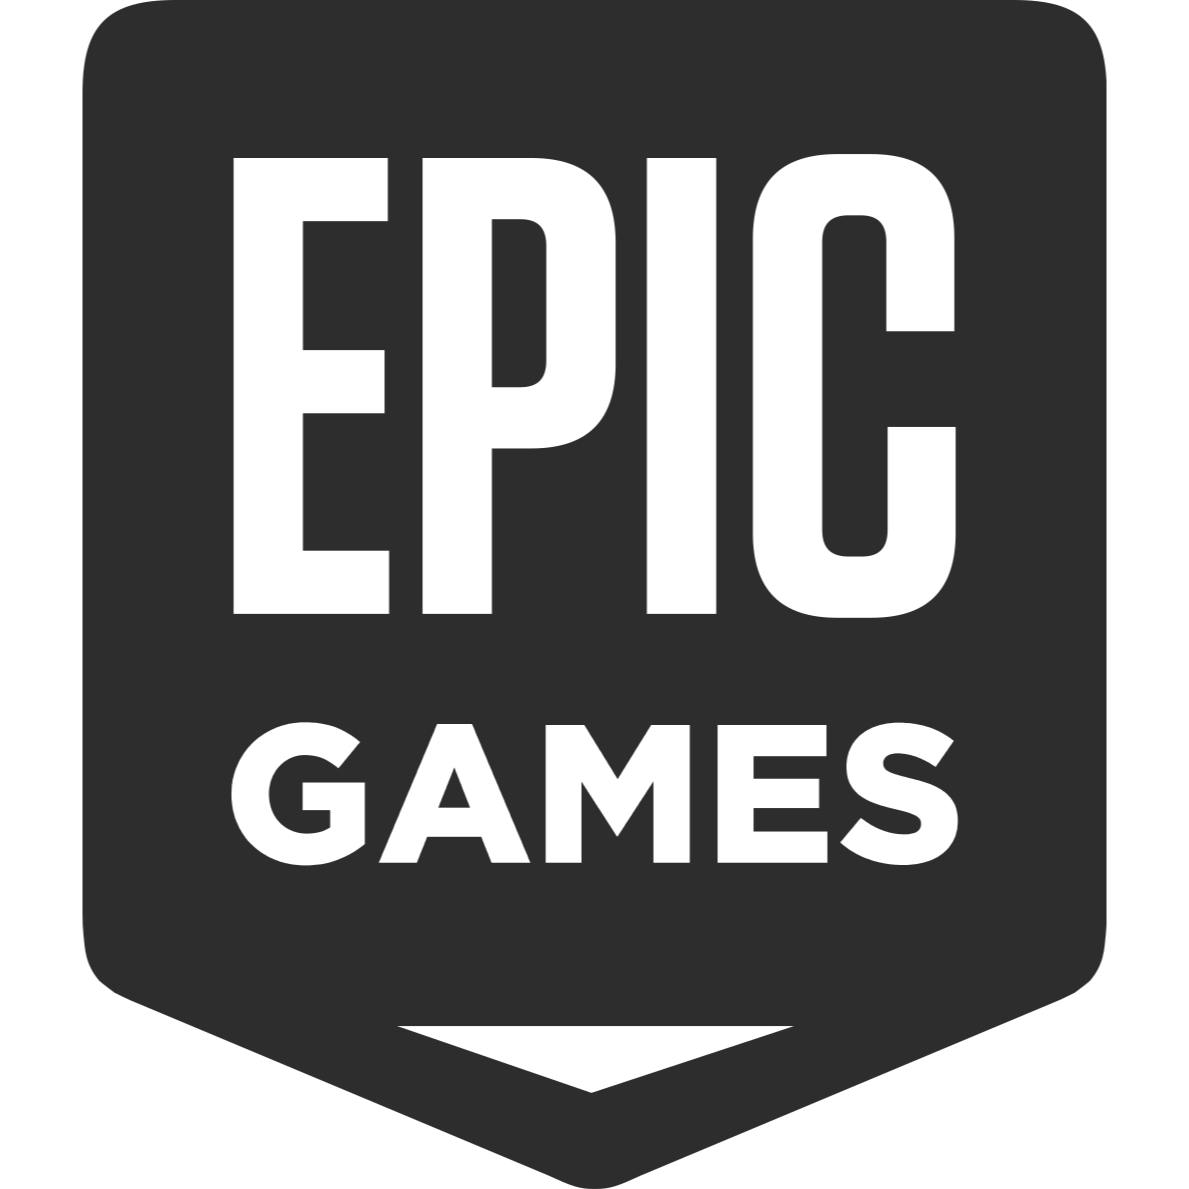 Rise of Industry  Download and Buy Today - Epic Games Store